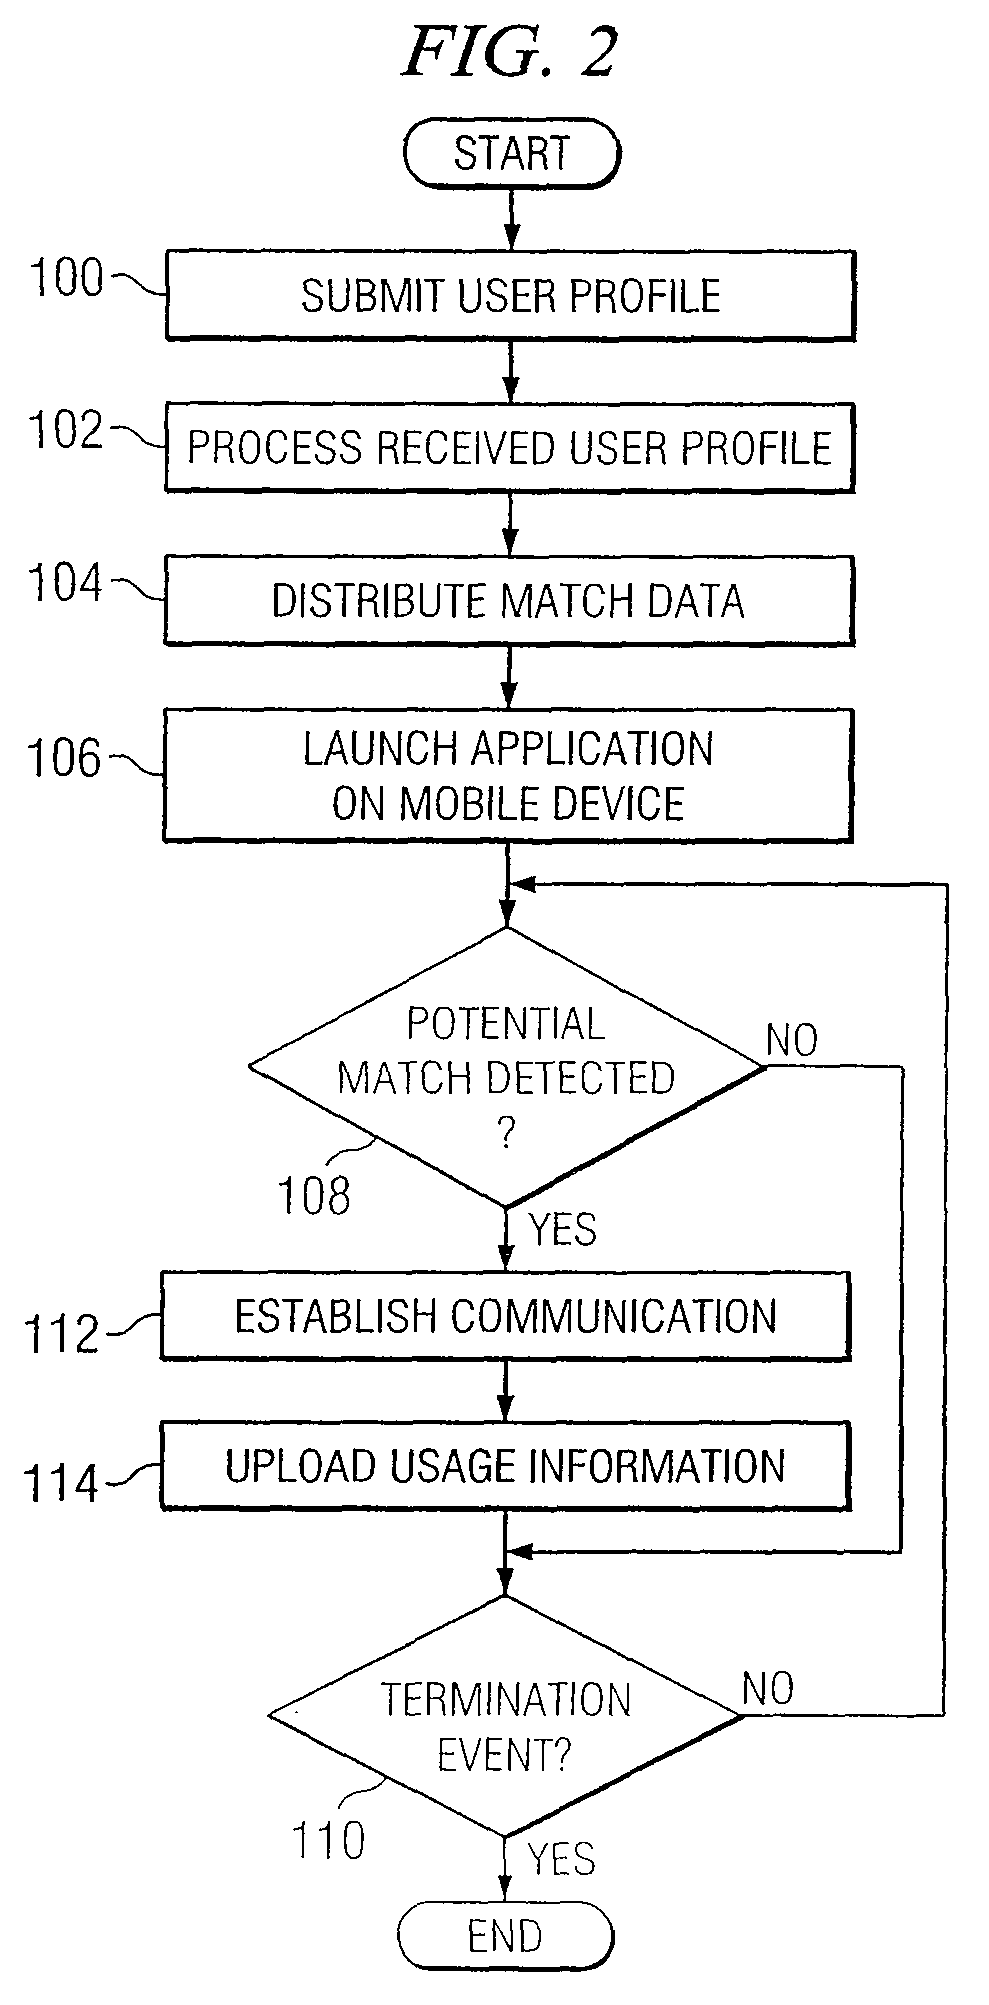 System and method for providing communication services to mobile device users incorporating proximity determination